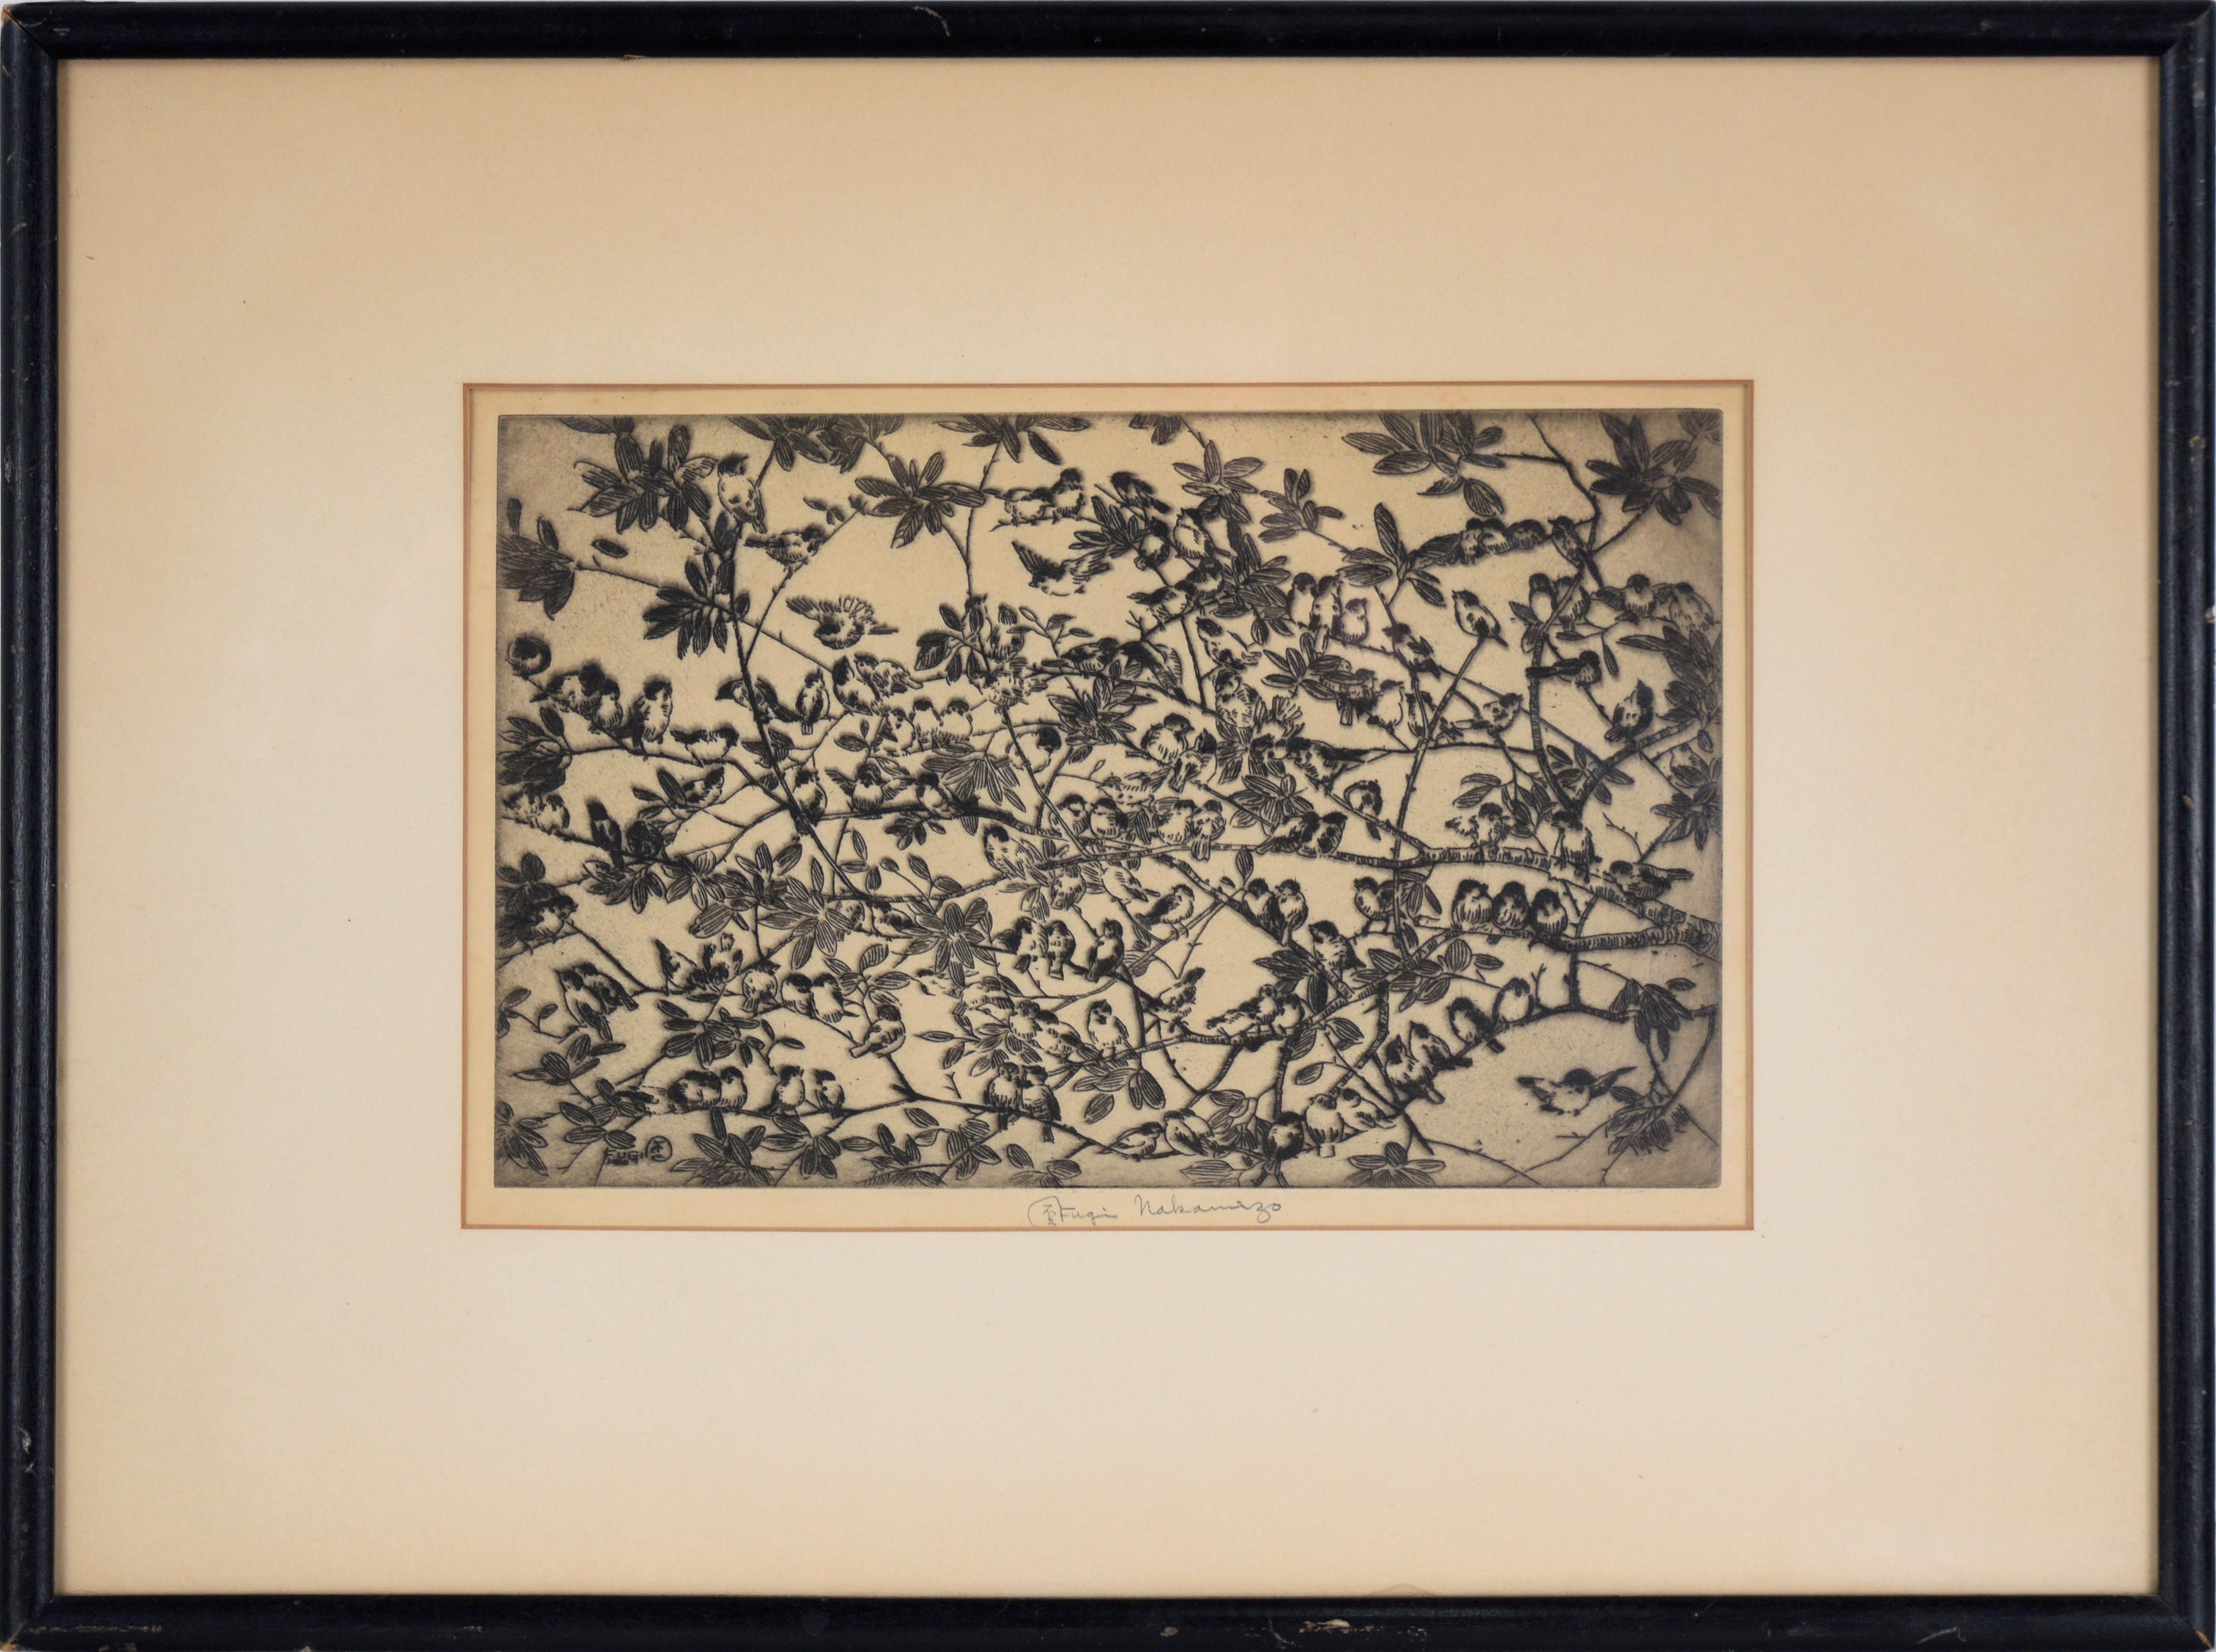 Fugi Nakamizo Landscape Print - Birds on Branches - Lithograph in Ink on Paper - Edition of 75